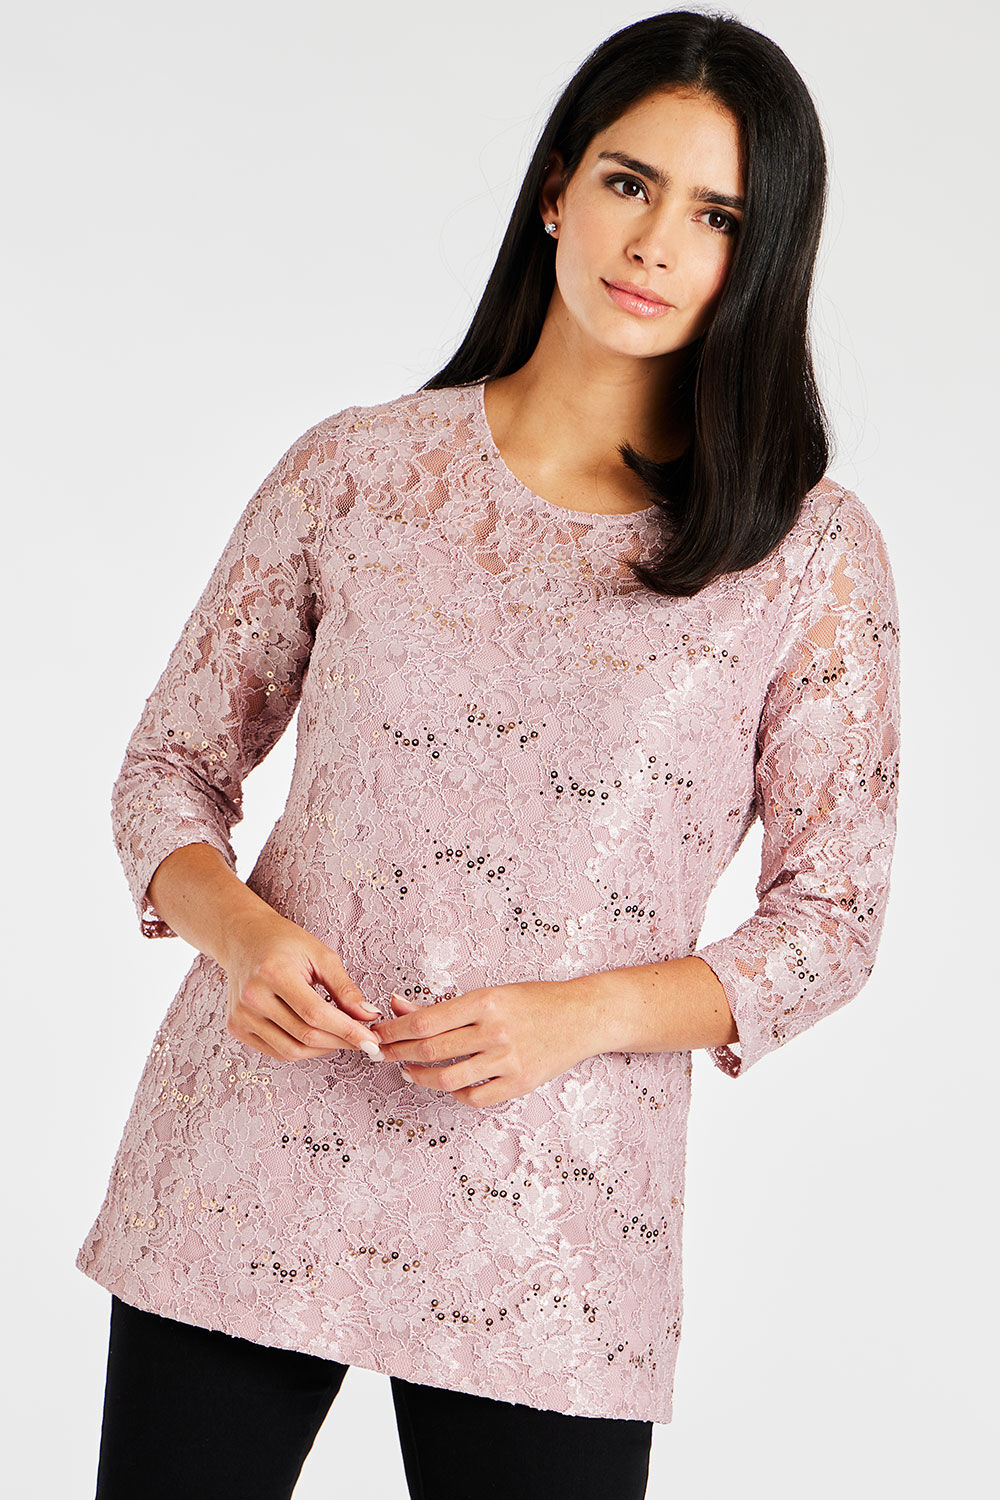 Bonmarche Pink 3/4 Sleeve Sequin and Lace Tunic, Size: 26